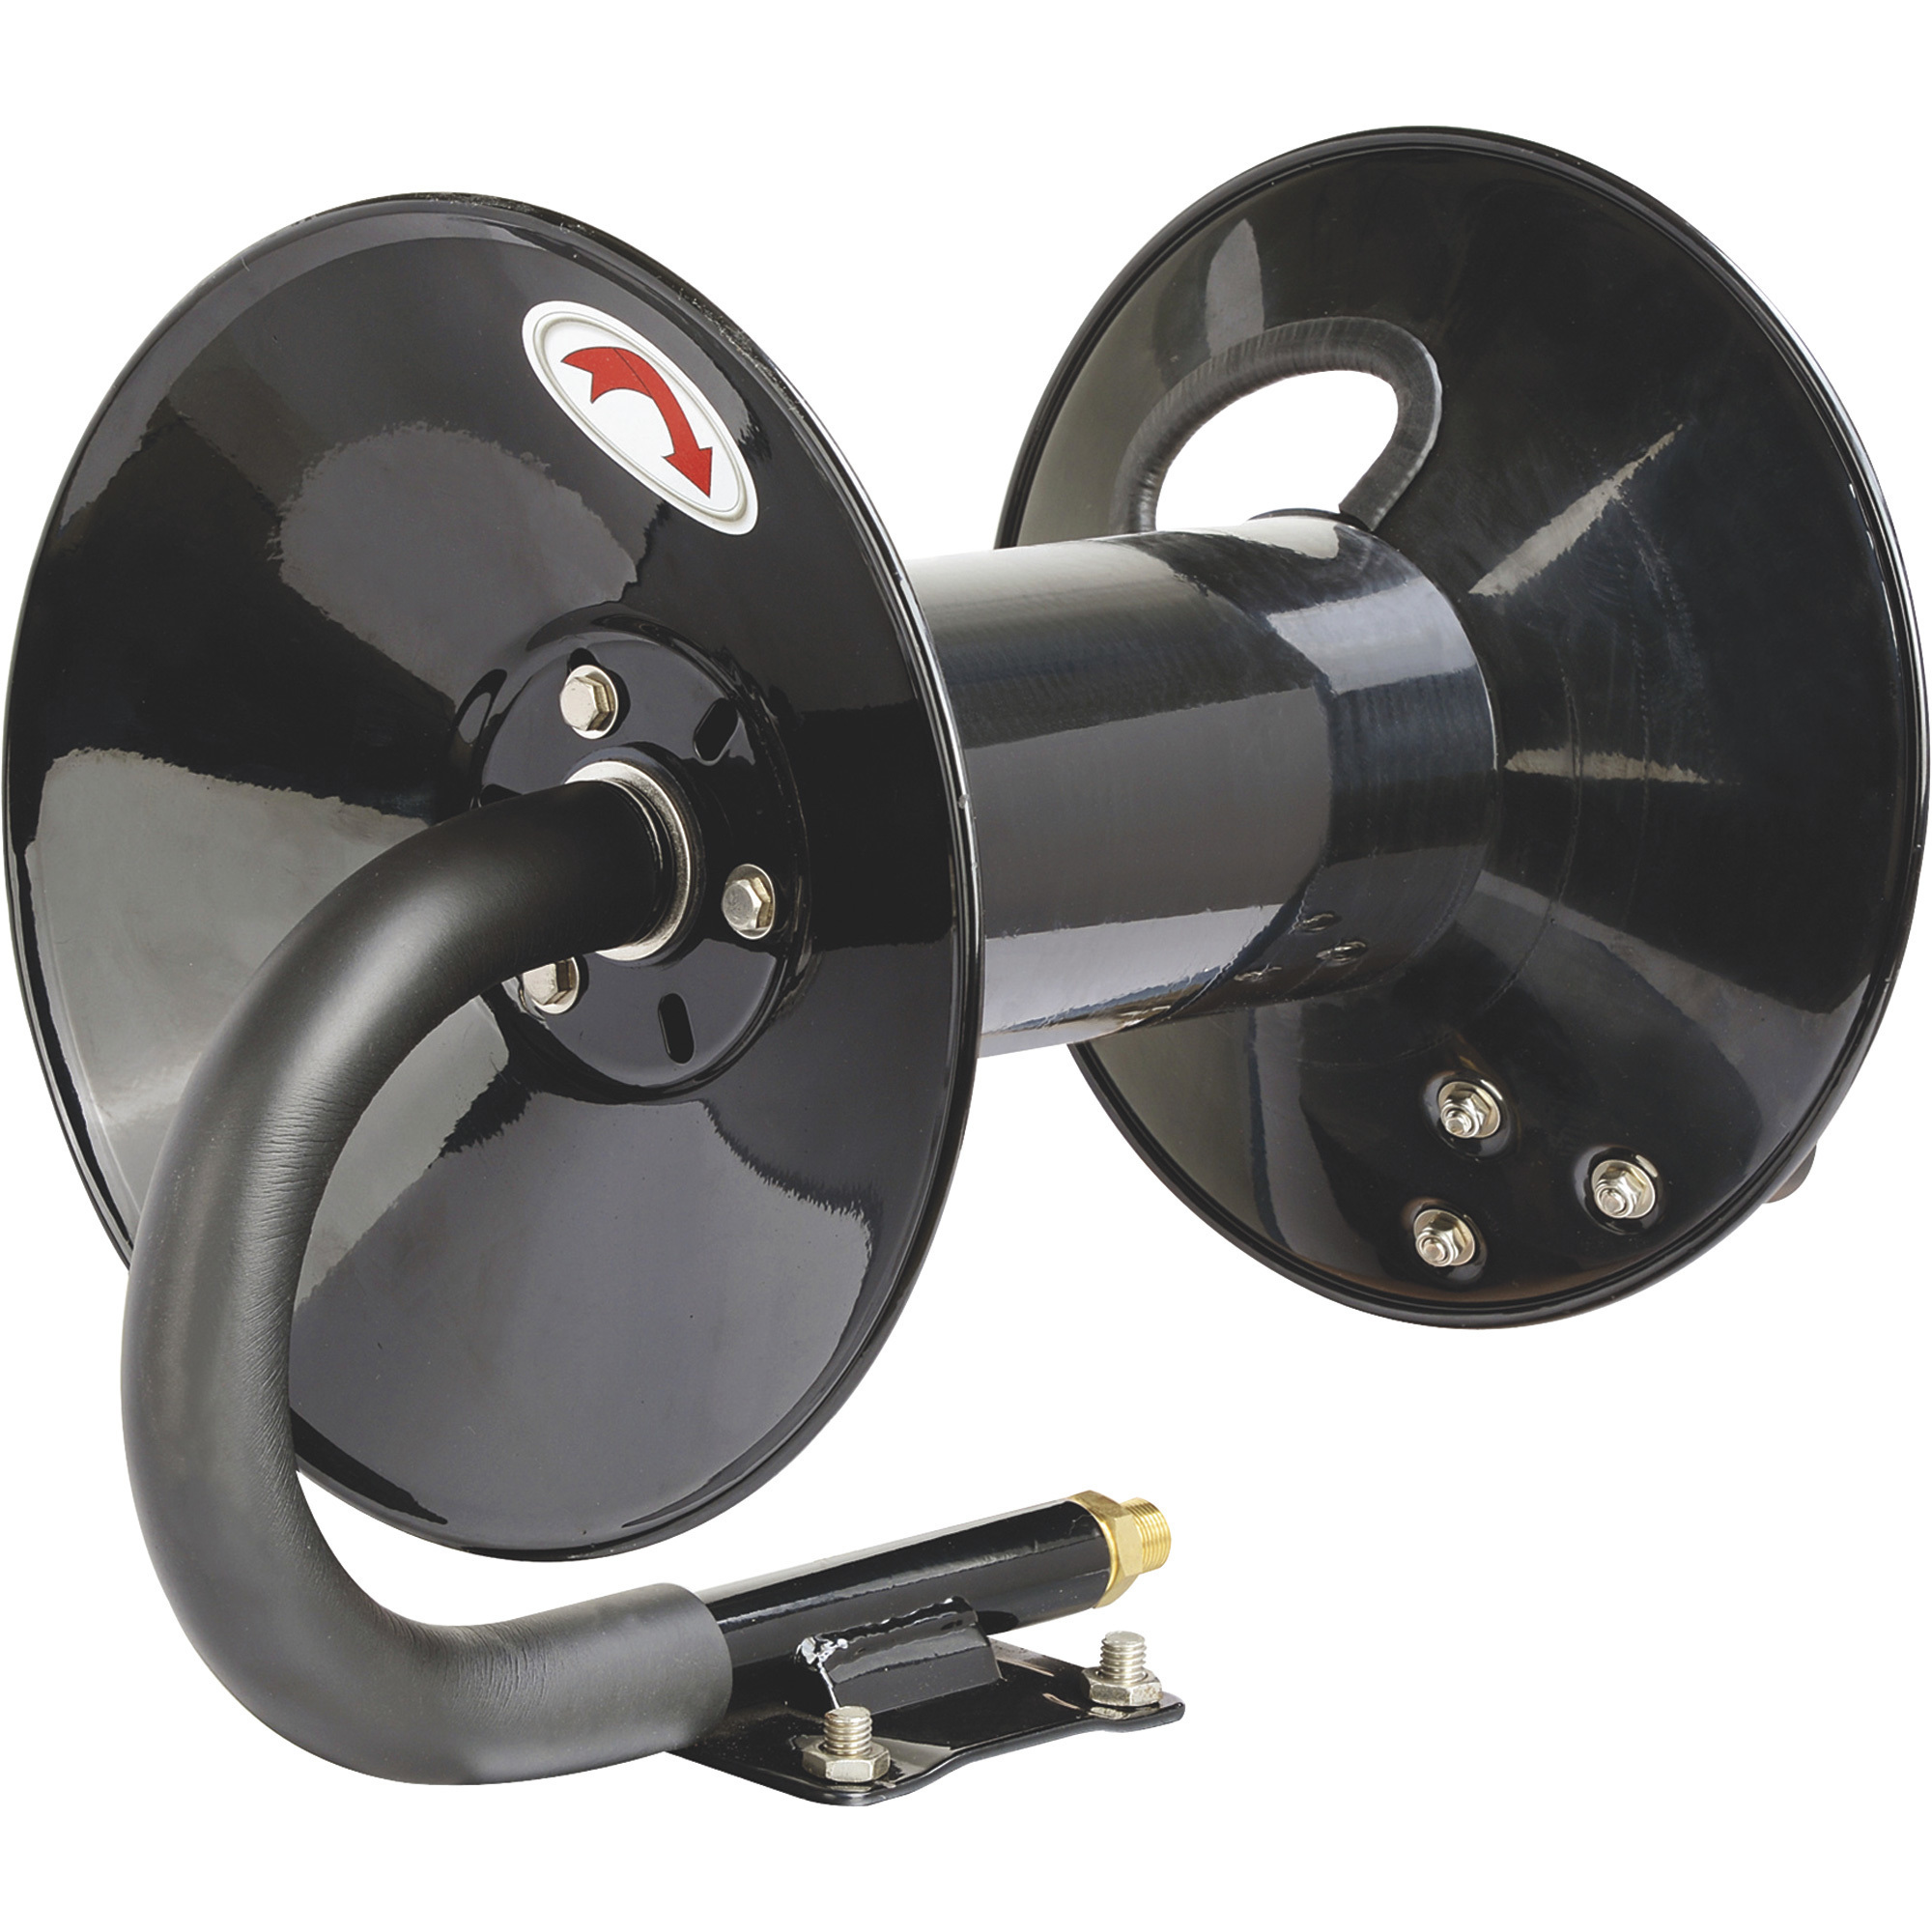 Ironton Air Hose Reel with Hand Brake, Holds 3/8in. x 100ft. Hose, Max. 300  PSI